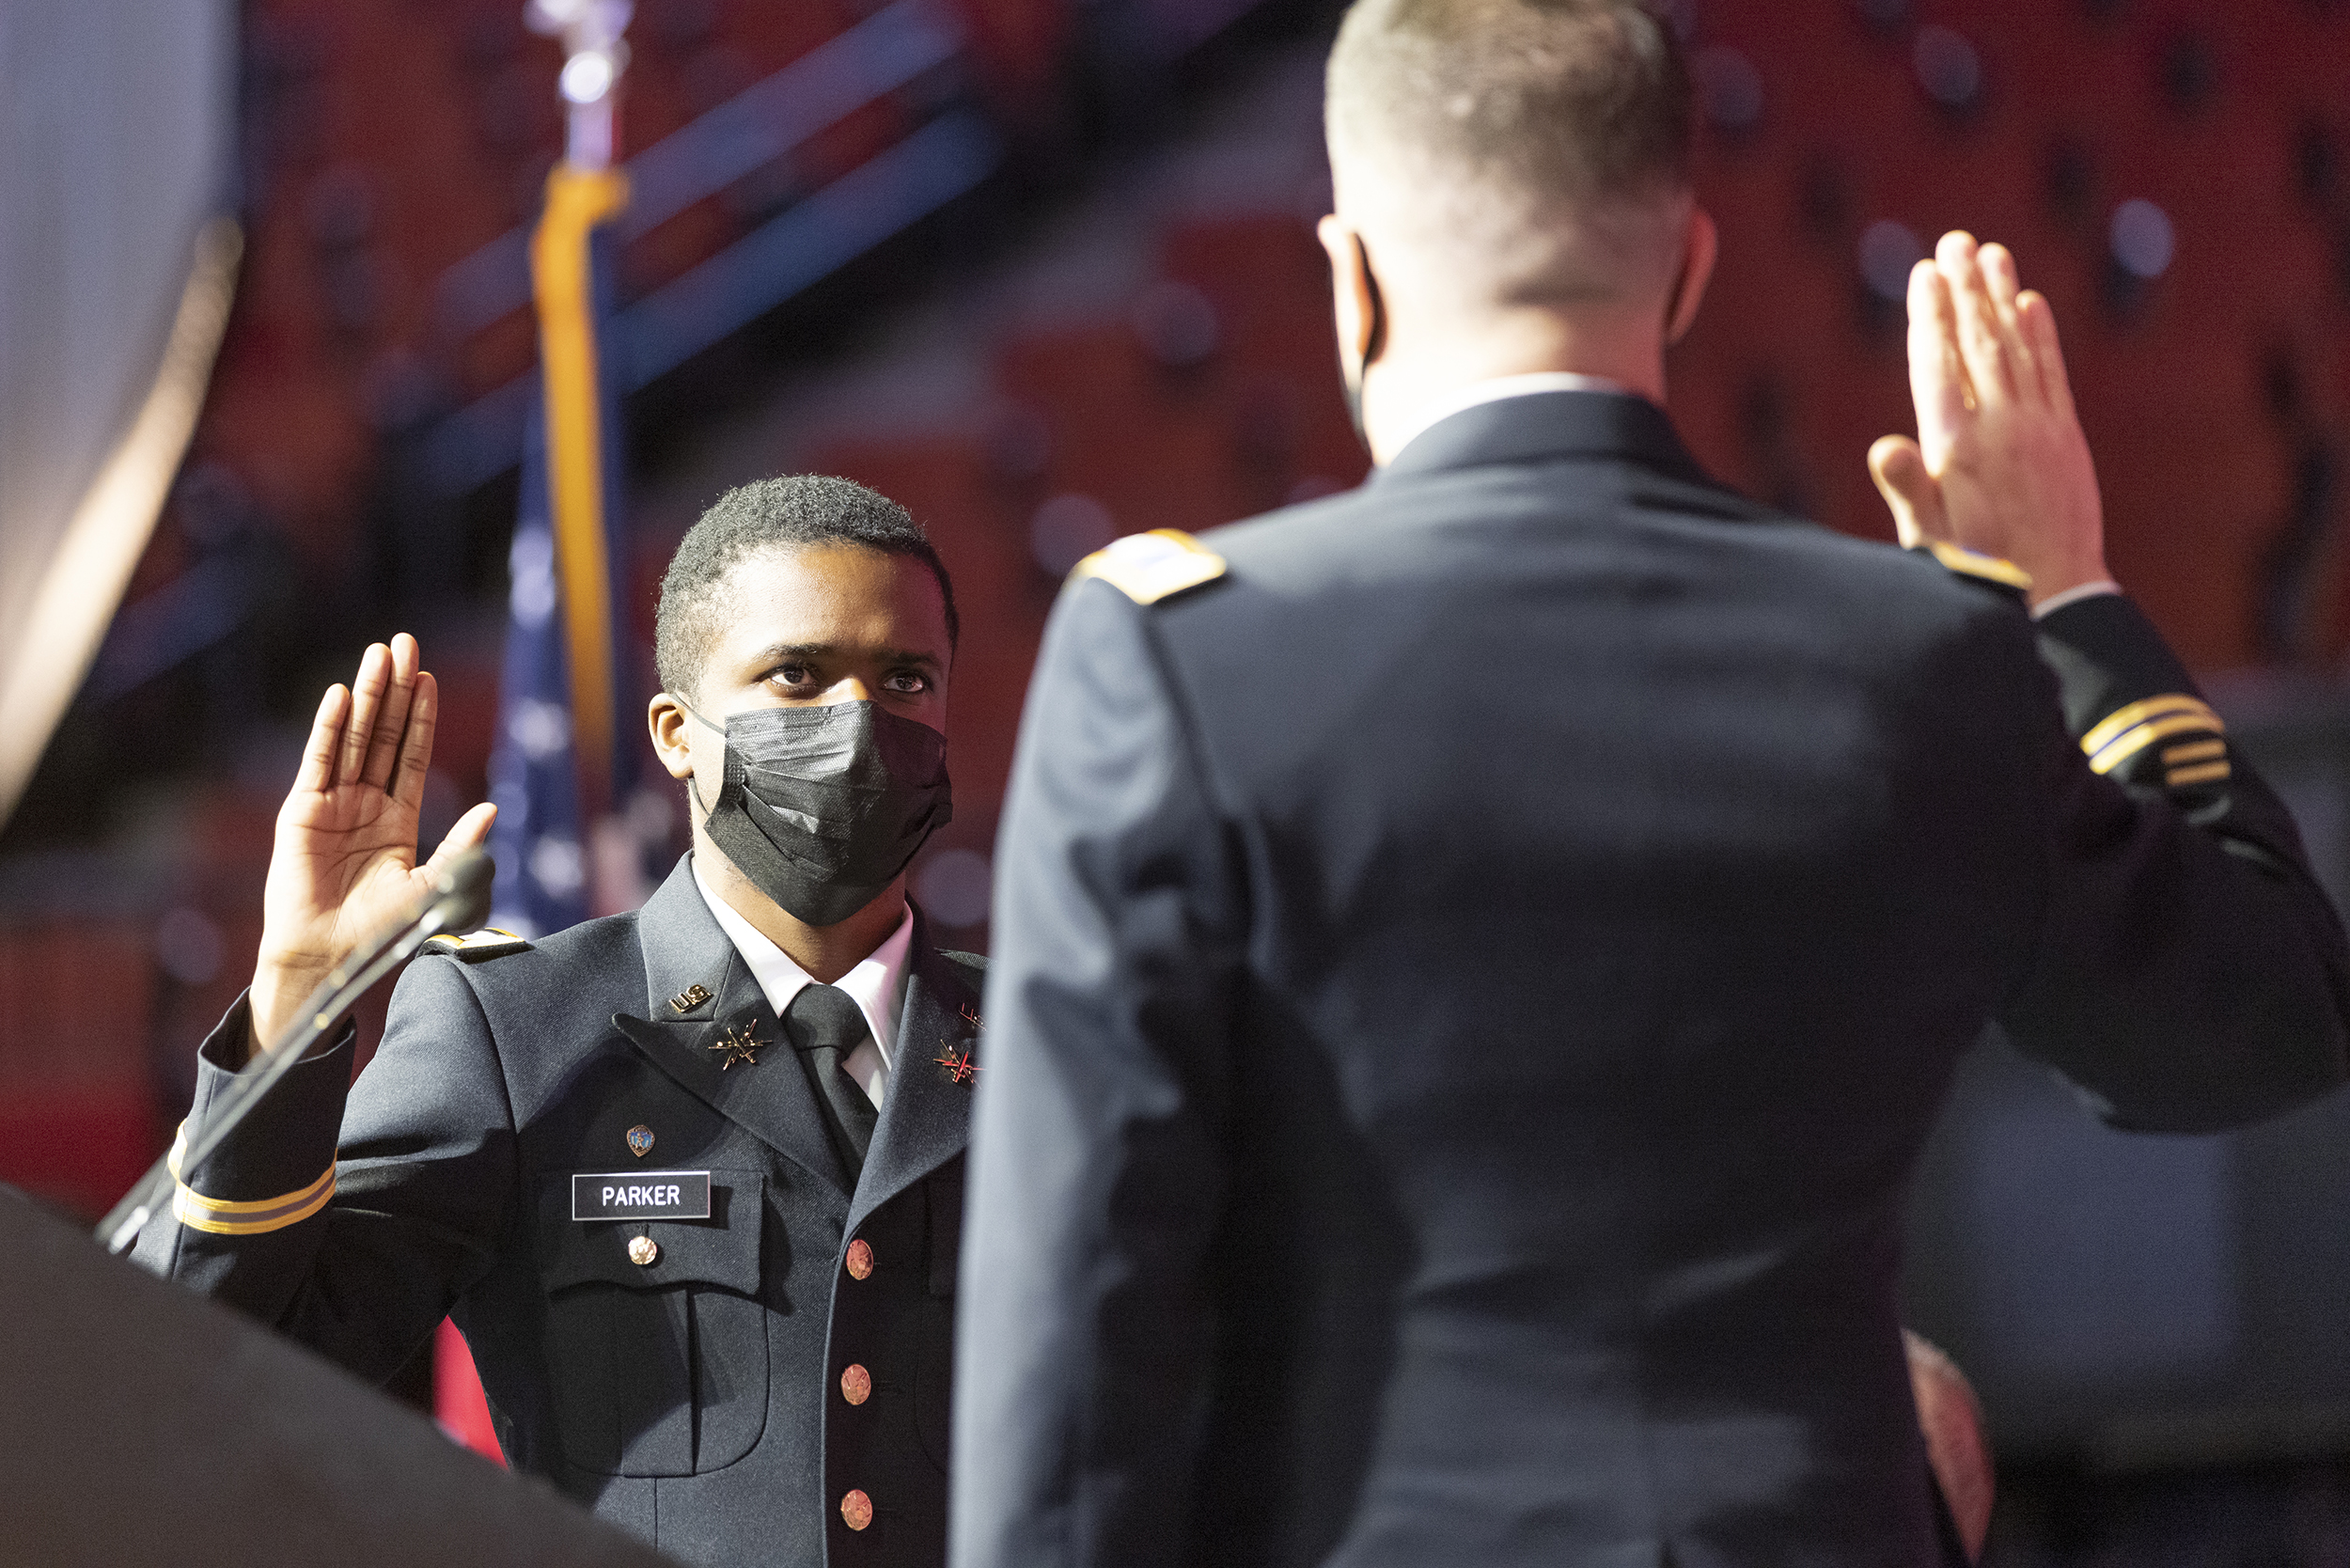 Hunter Parker takes the oath of office during the undergraduate commencement ceremony Dec. 18 at Pinnacle Bank Arena. Col. Thad Fineran, chief of staff of the Nebraska National Guard, administers the oath. Parker was commissioned a second lieutenant in the U. S. Army during a ceremony Dec. 17.